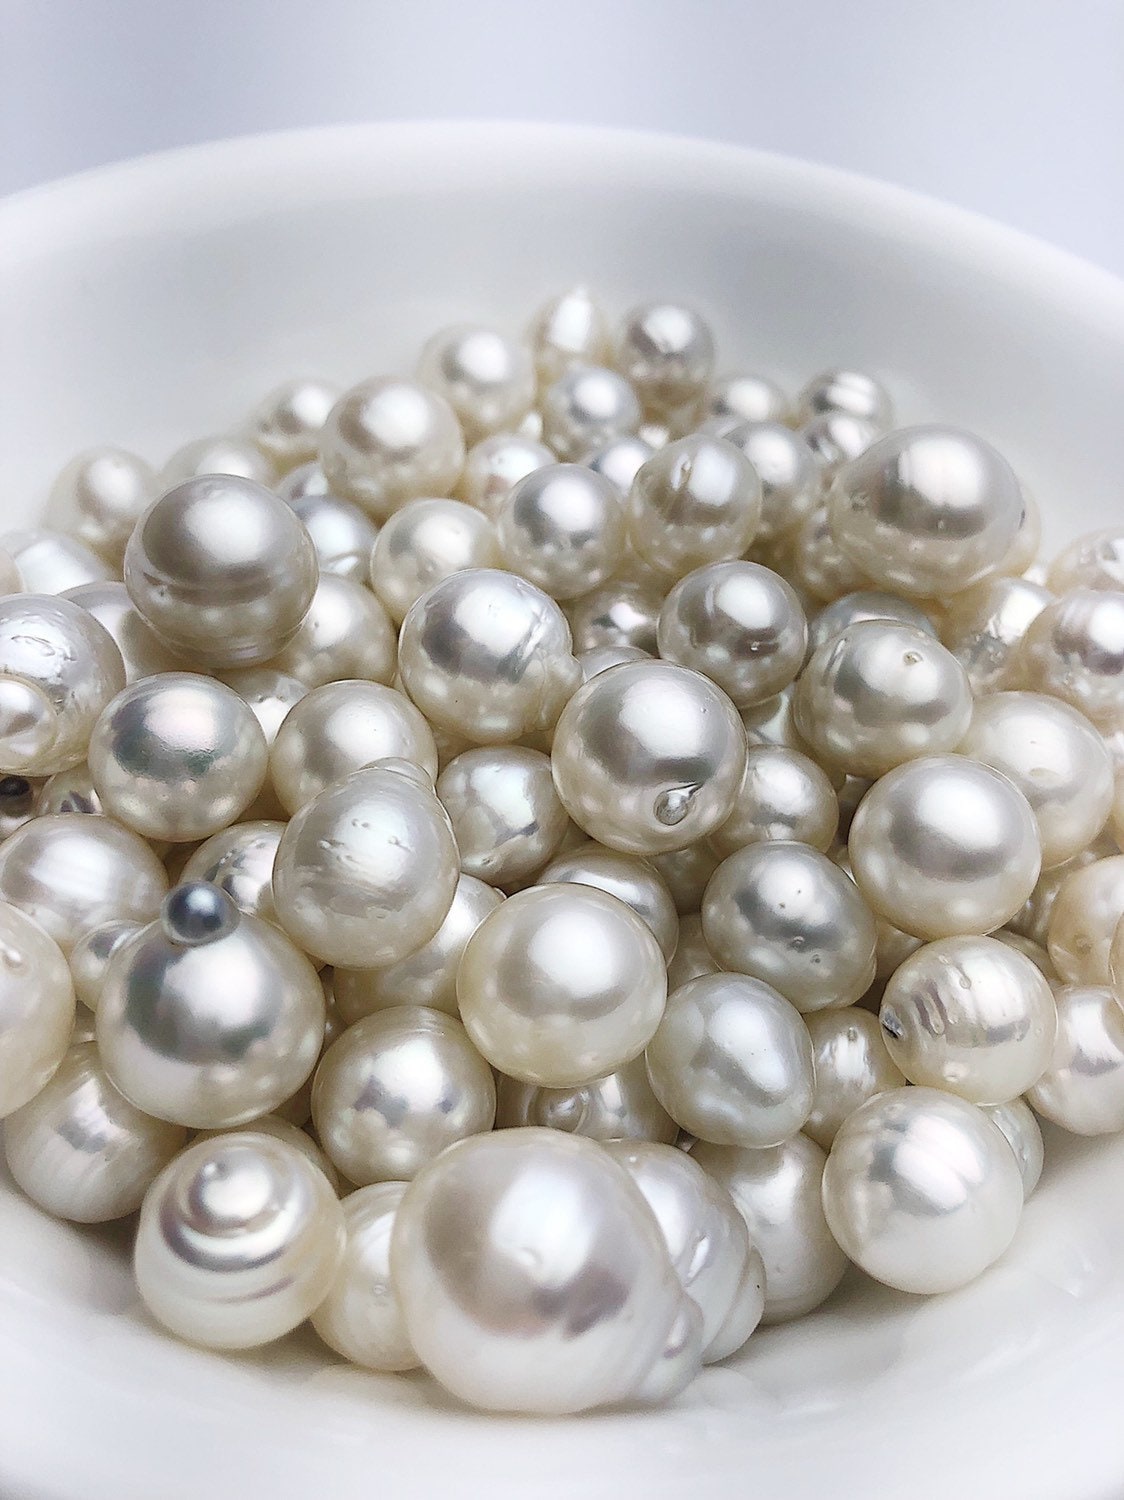 10-19mm White South Sea Loose Pearls, Drops, 10mm - 19mm, AA Quality #946